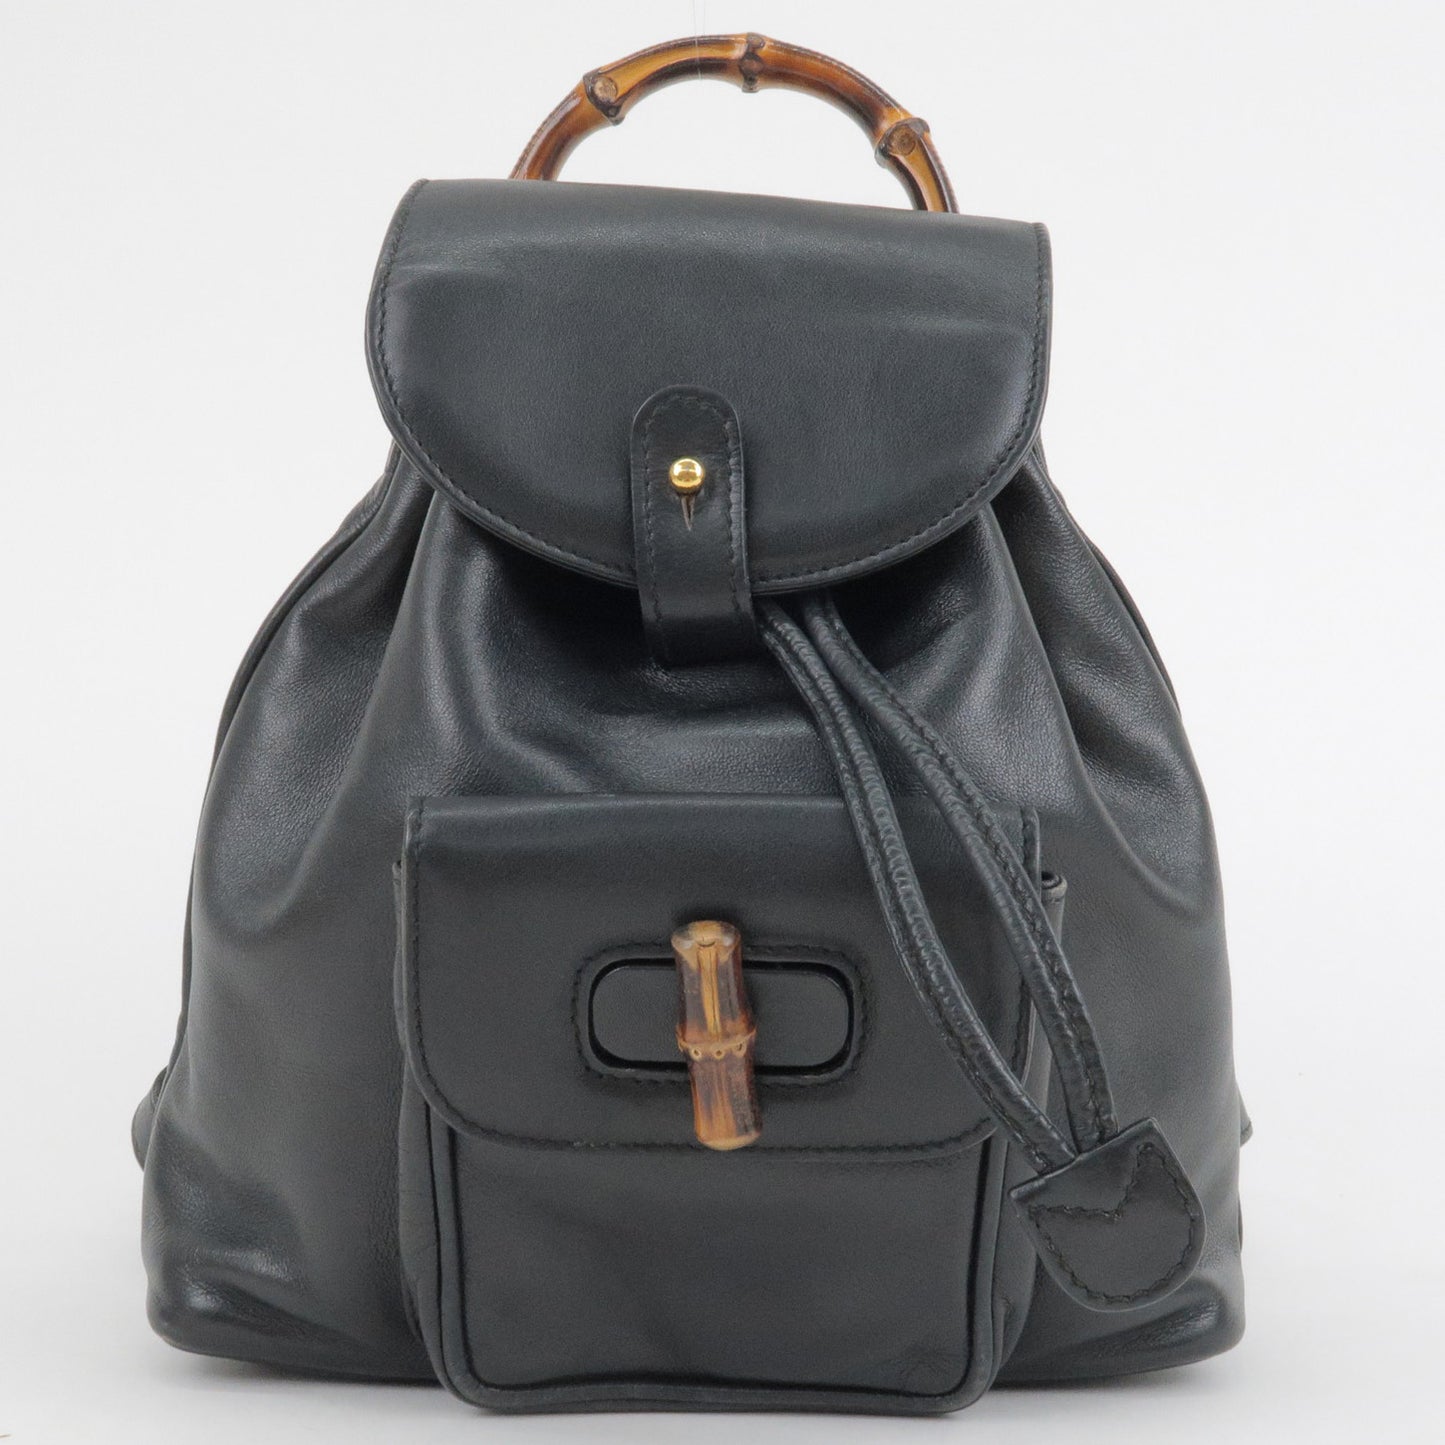 GUCCI Leather Bamboo Back Pack Ruck Sack Black 003.1705.0030